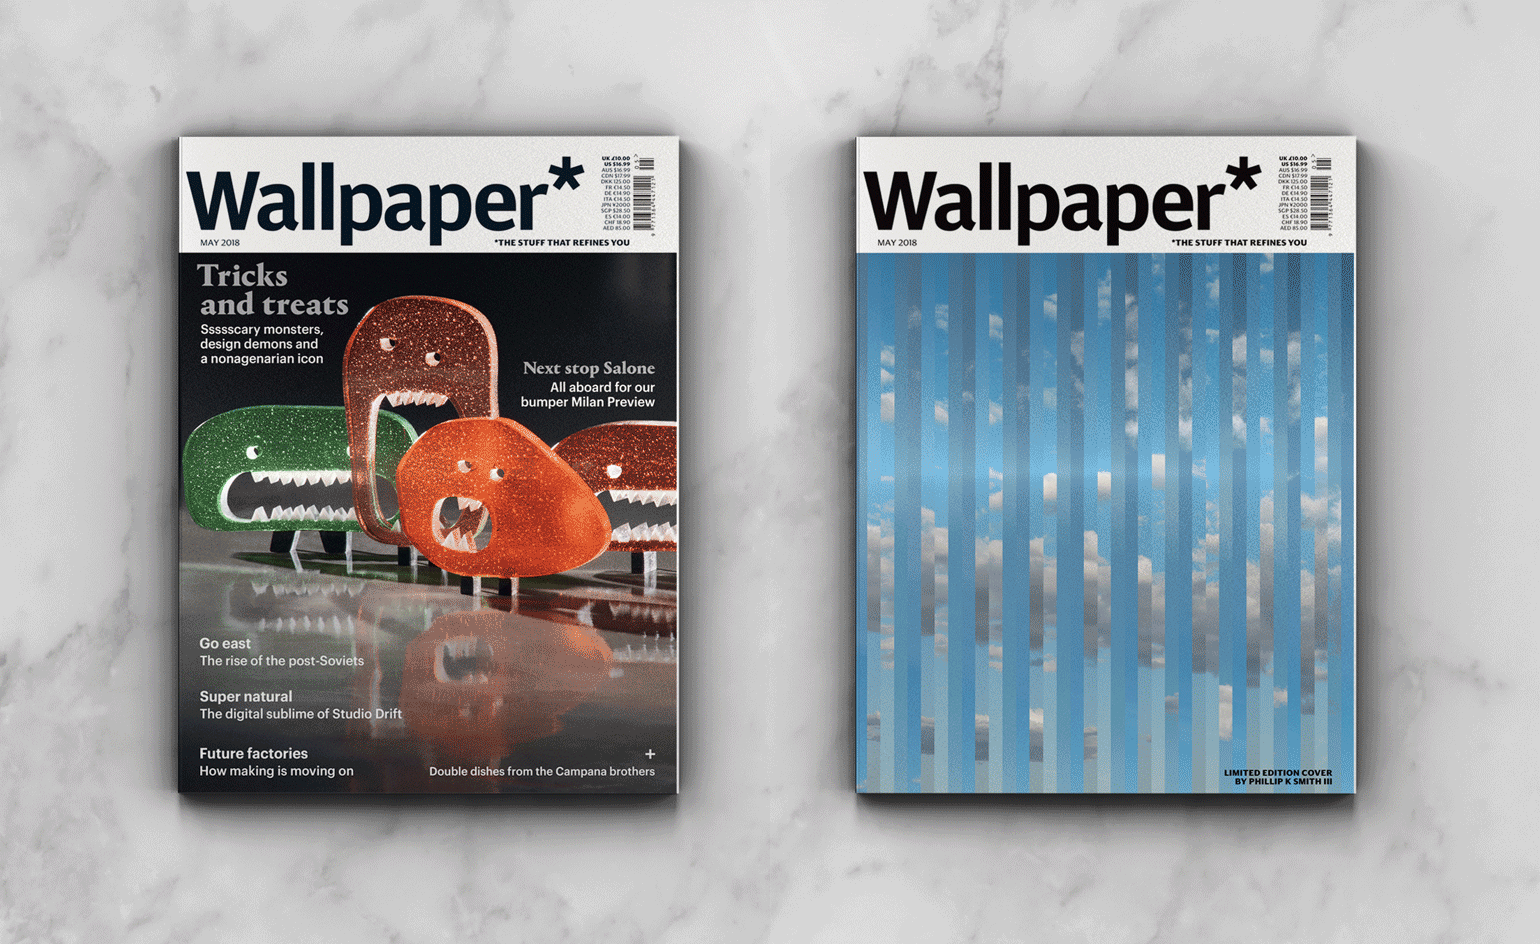 Newsstand and limited-edition covers of W*230